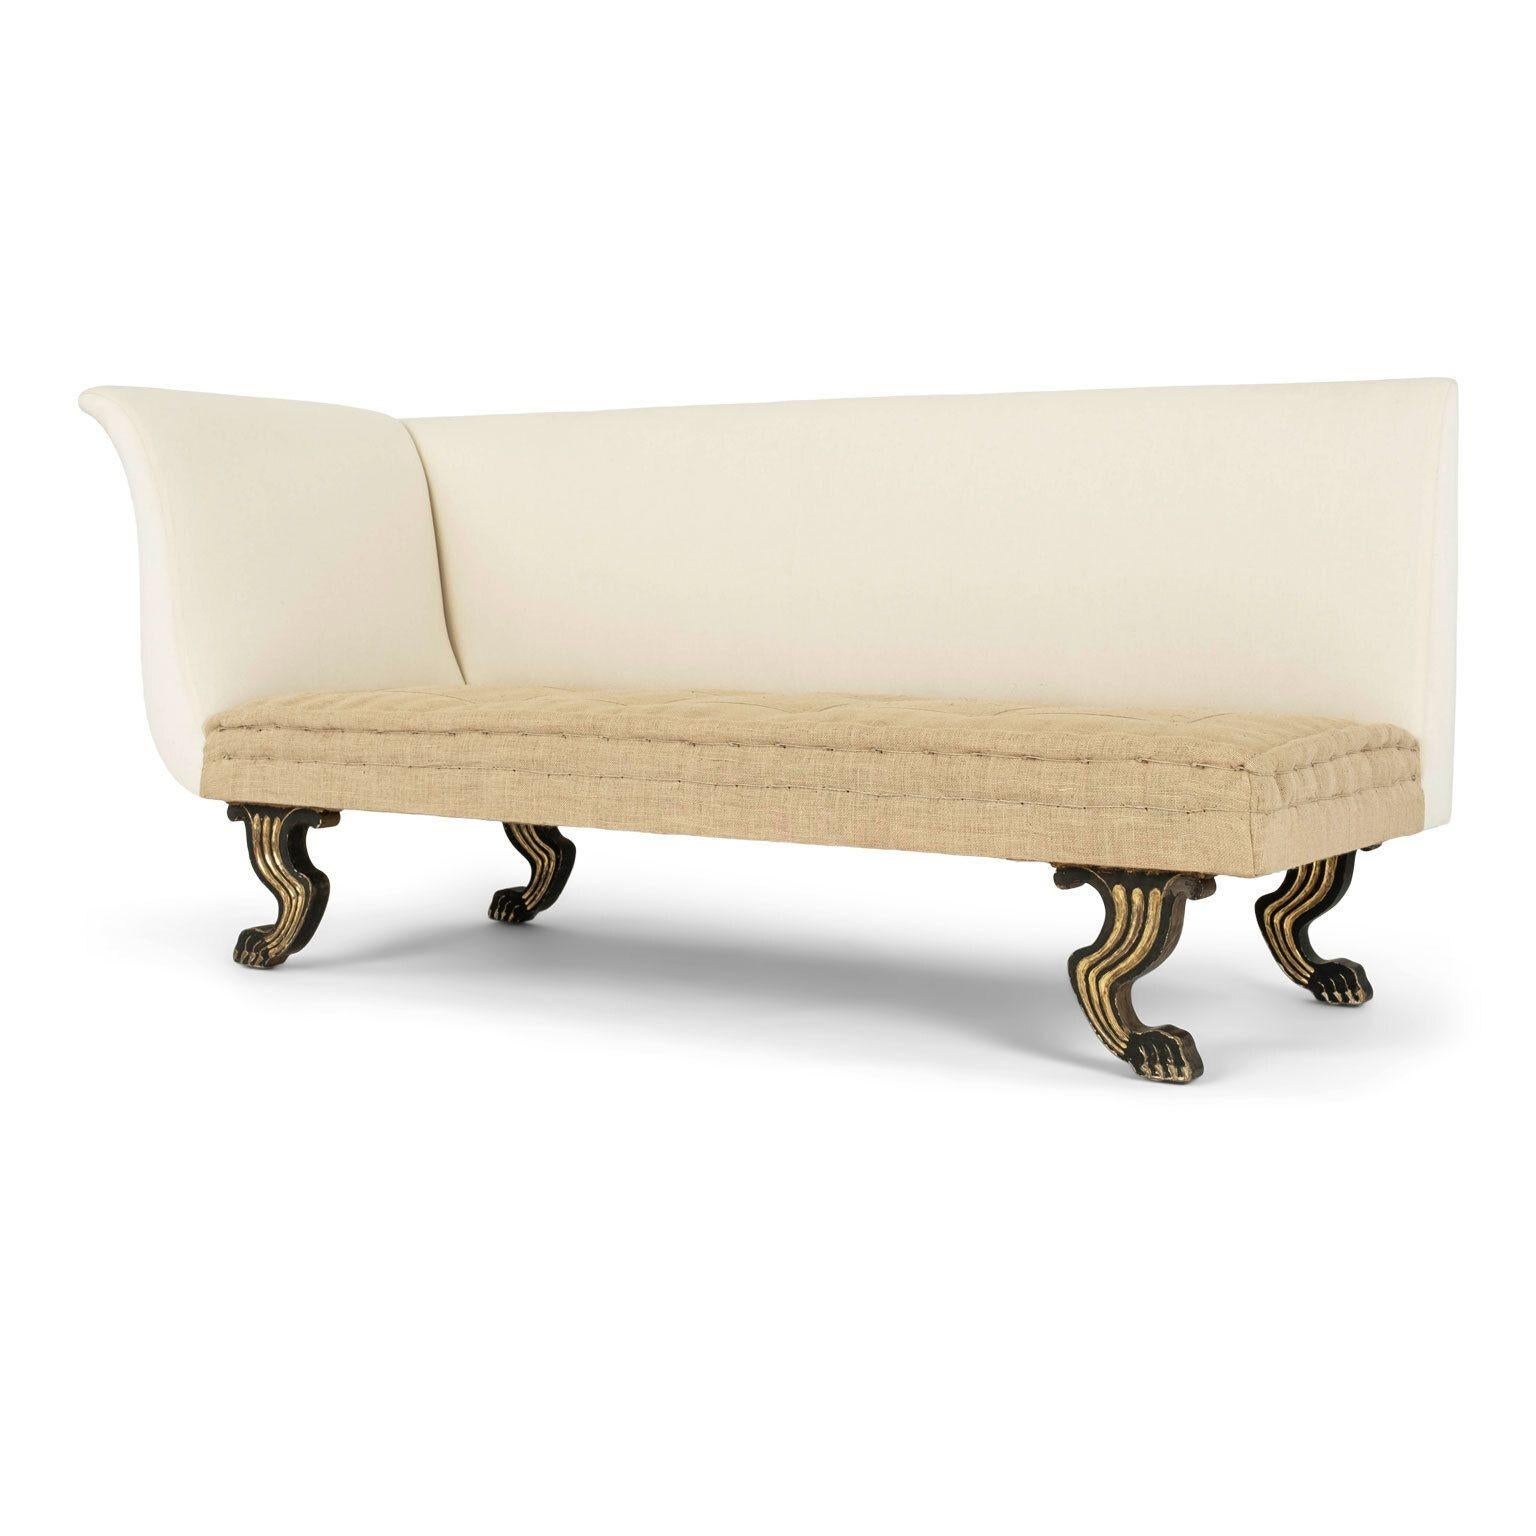 Burlap Empire Style Curved-Arm Daybed